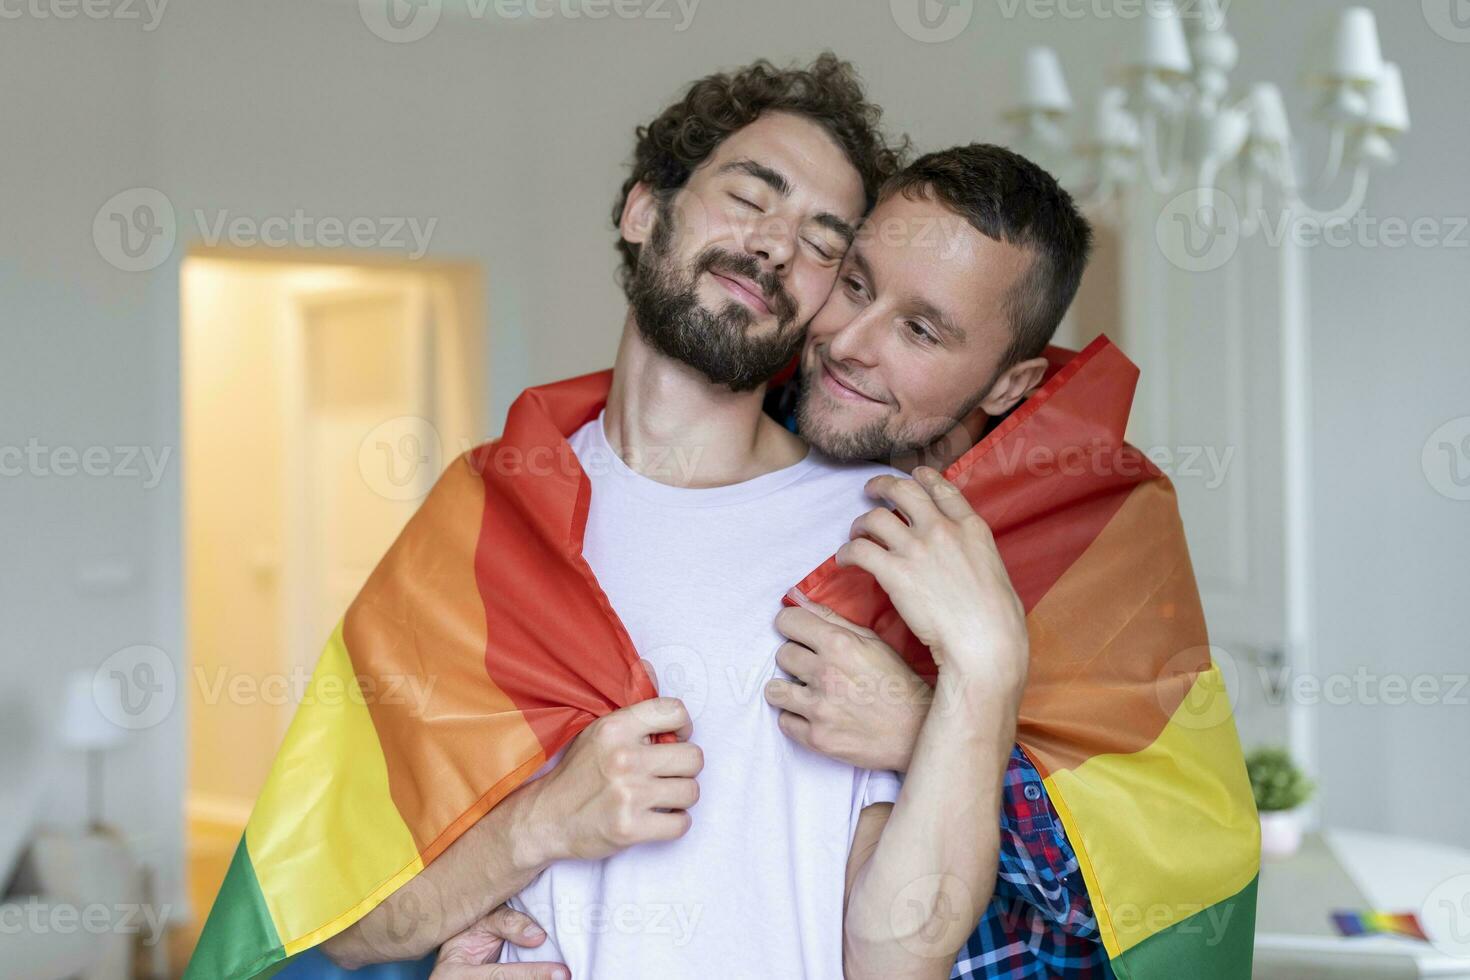 Affectionate Male gay couple indoors. Man embracing his boyfriend from behind at home. Gay couple celebrating pride month photo